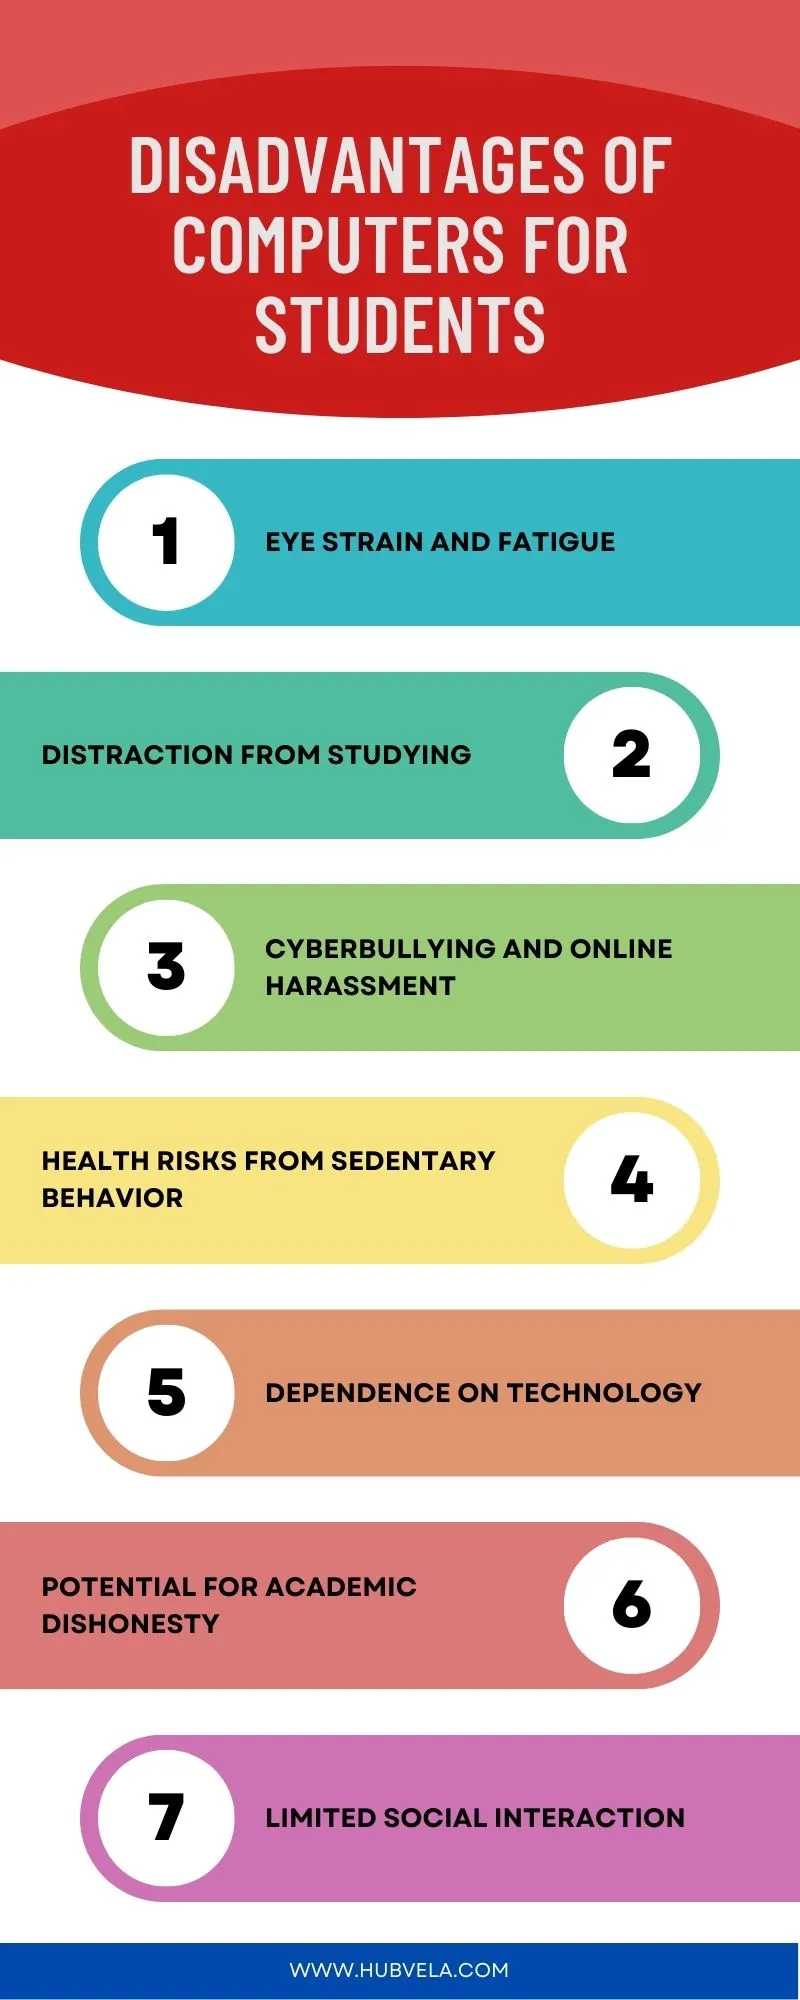 Disadvantages of Computers For Students Infographic